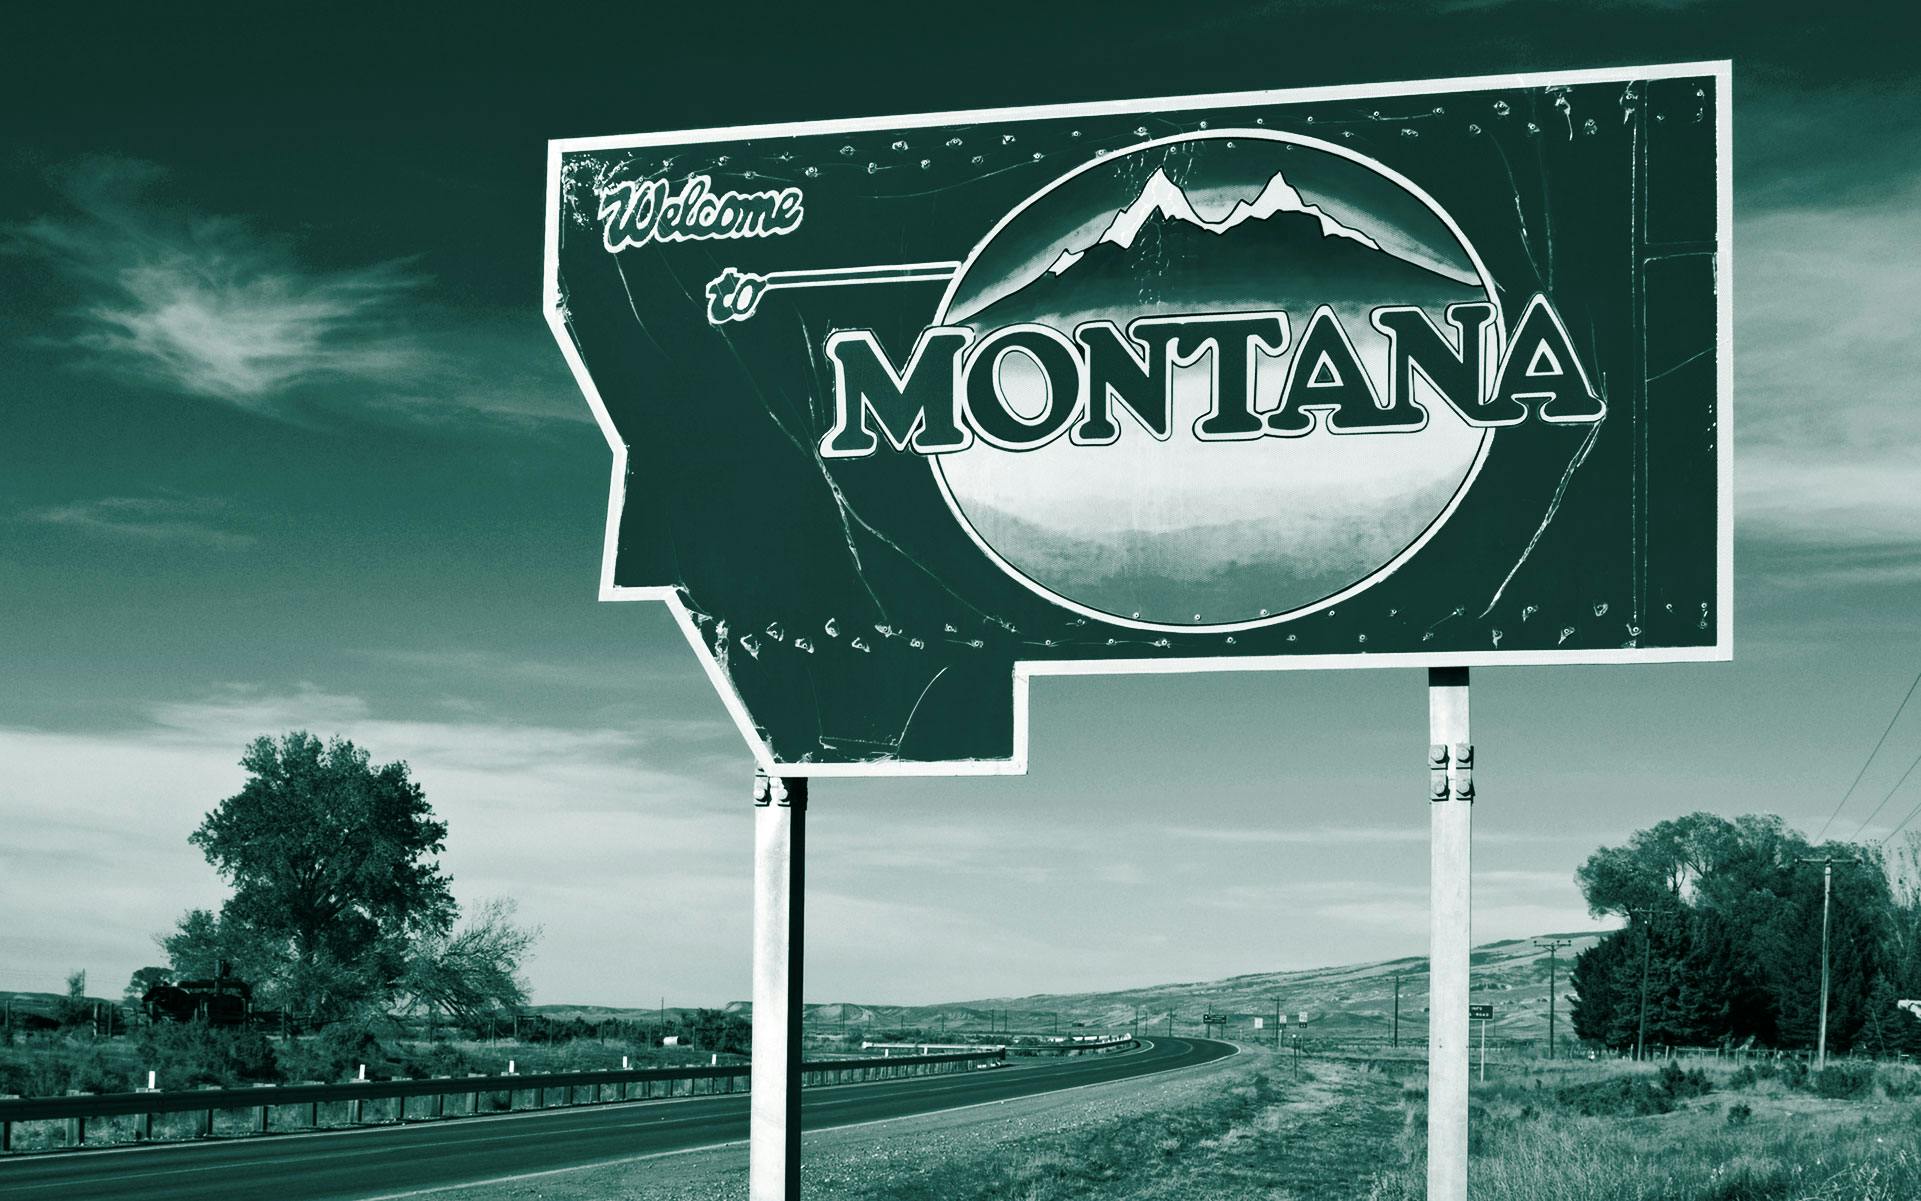 New Approach Montana aims to put two legalization measures on 2020